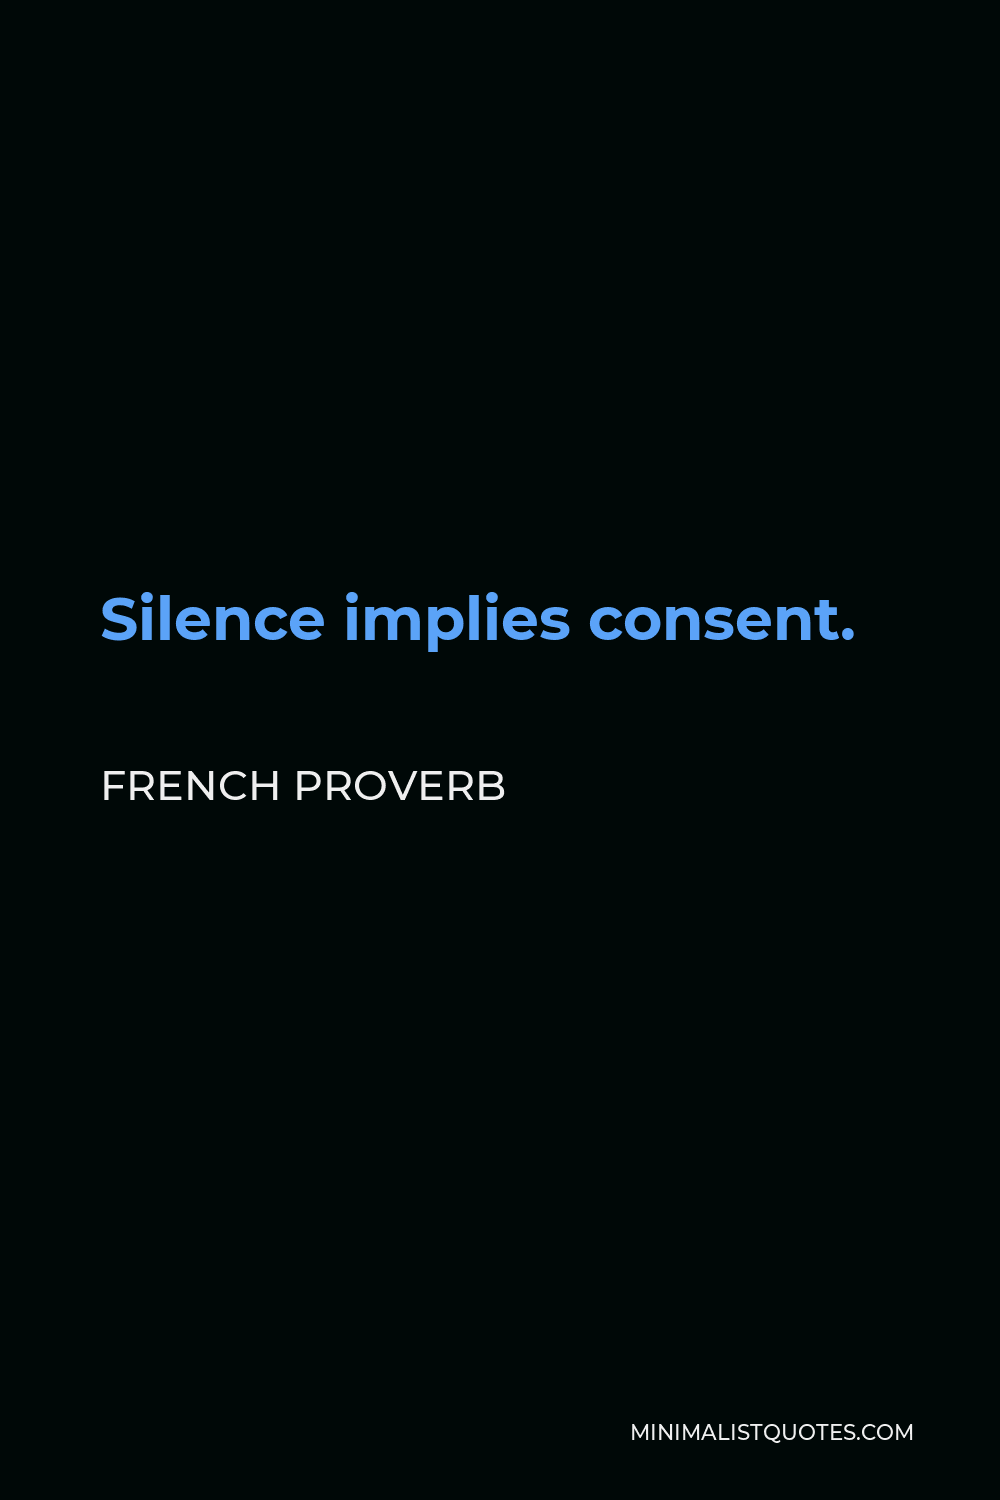 French Proverb Quote - Silence implies consent.